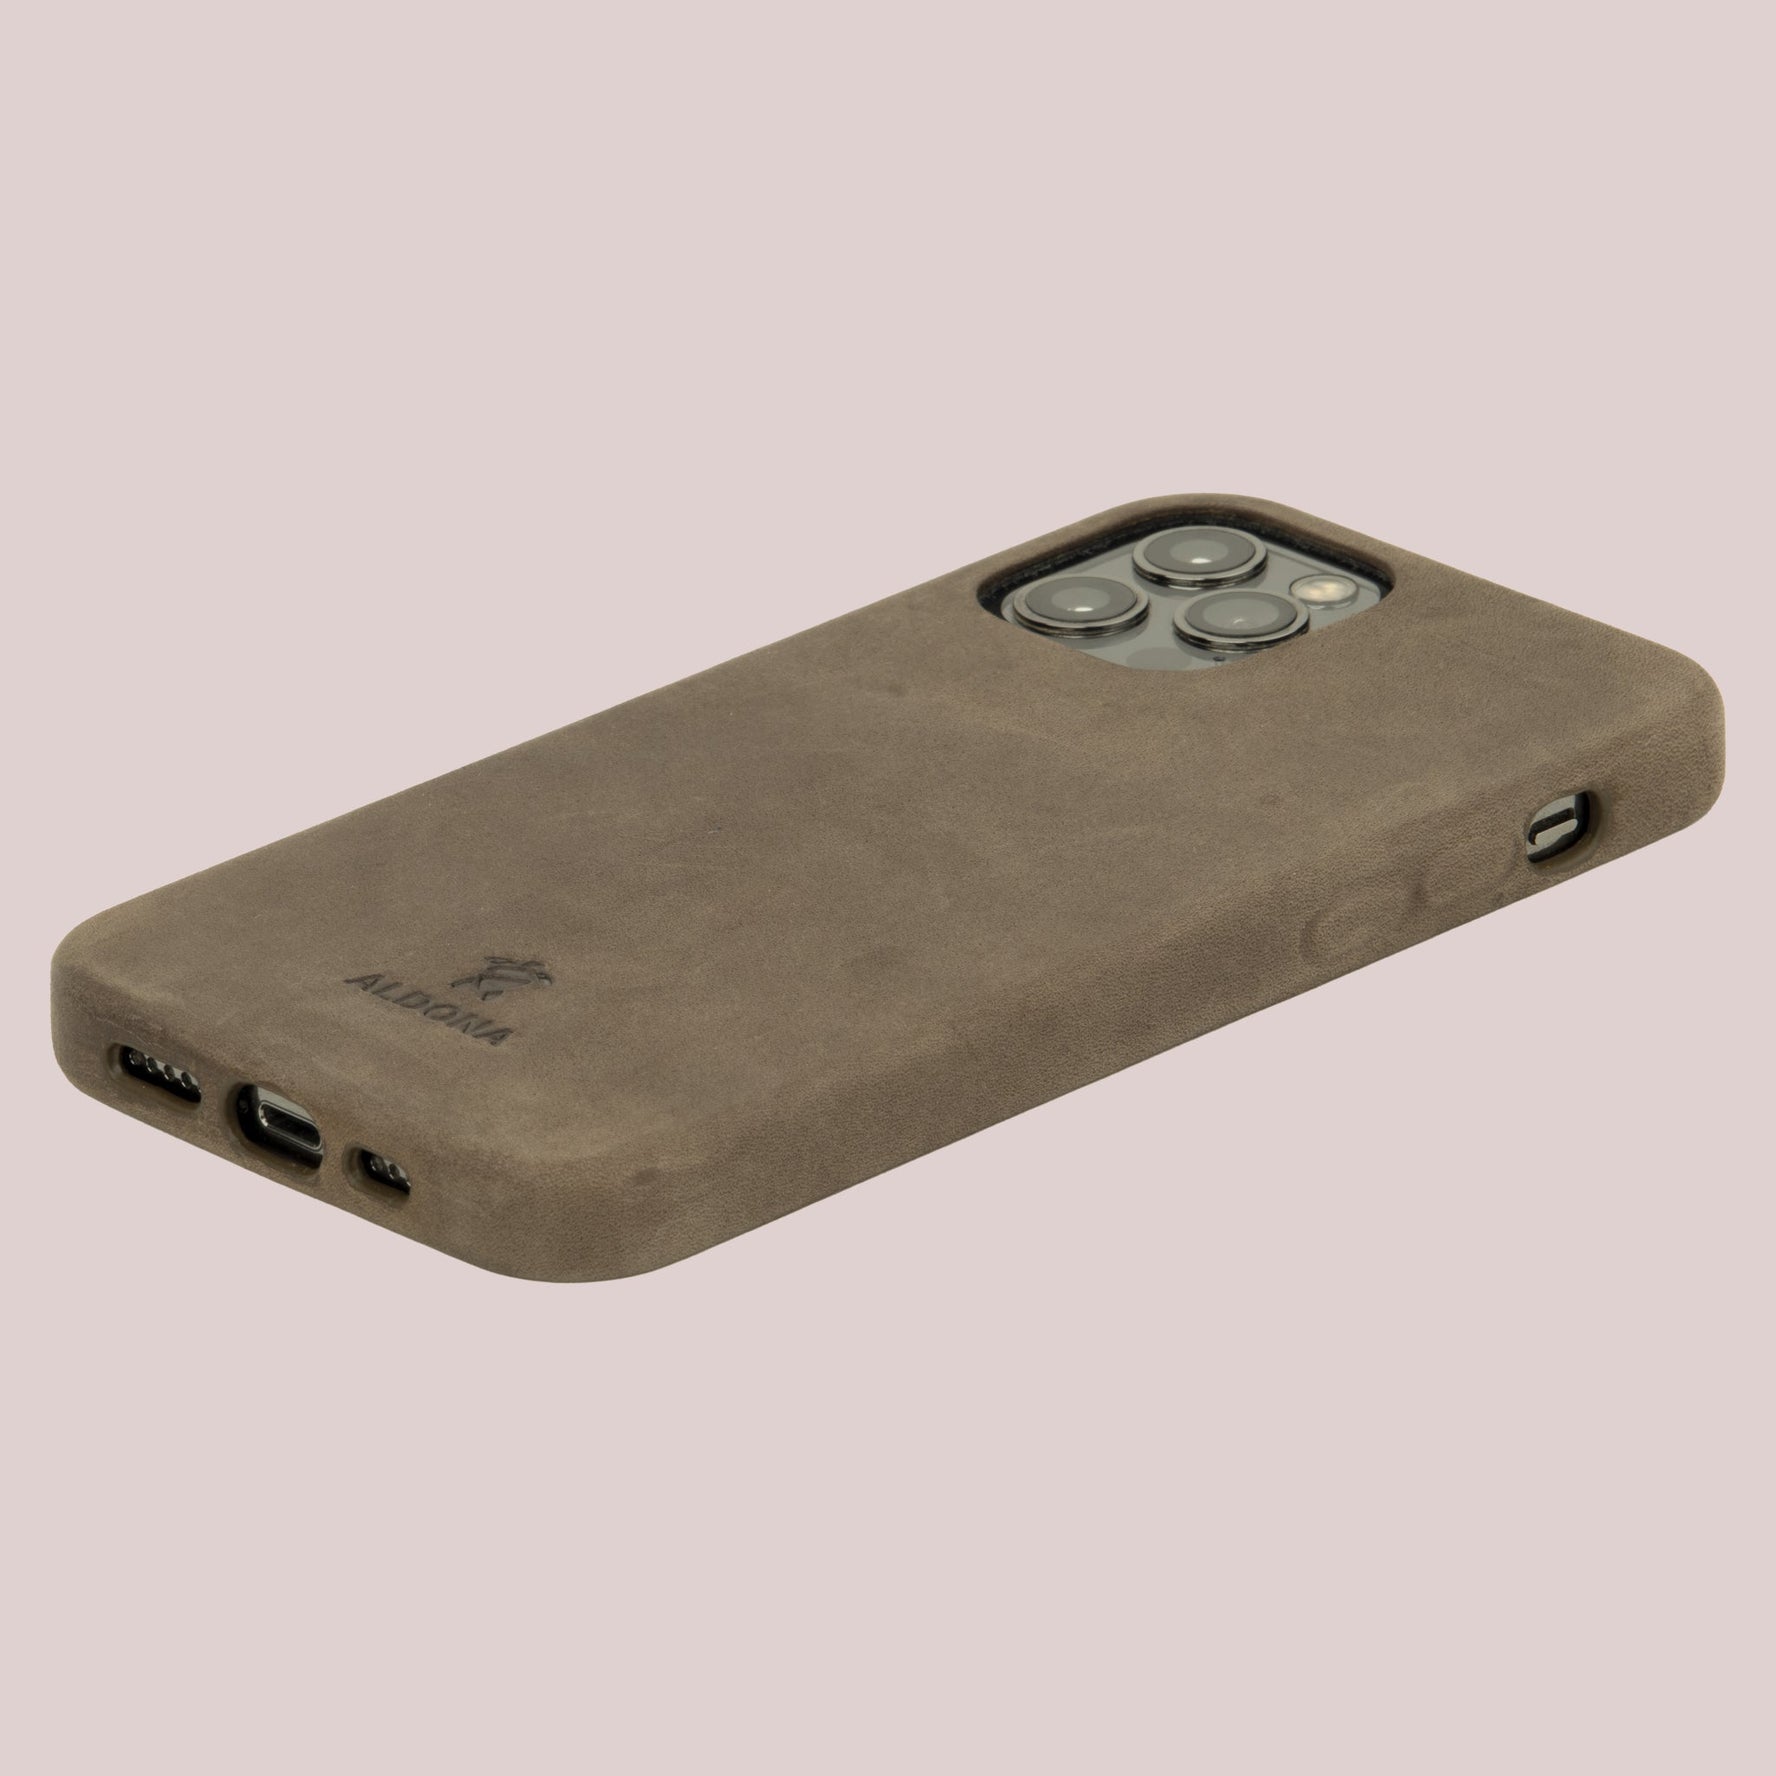 Kalon Case for iPhone 13 series with MagSafe Compatibility - Burnt Tobacco